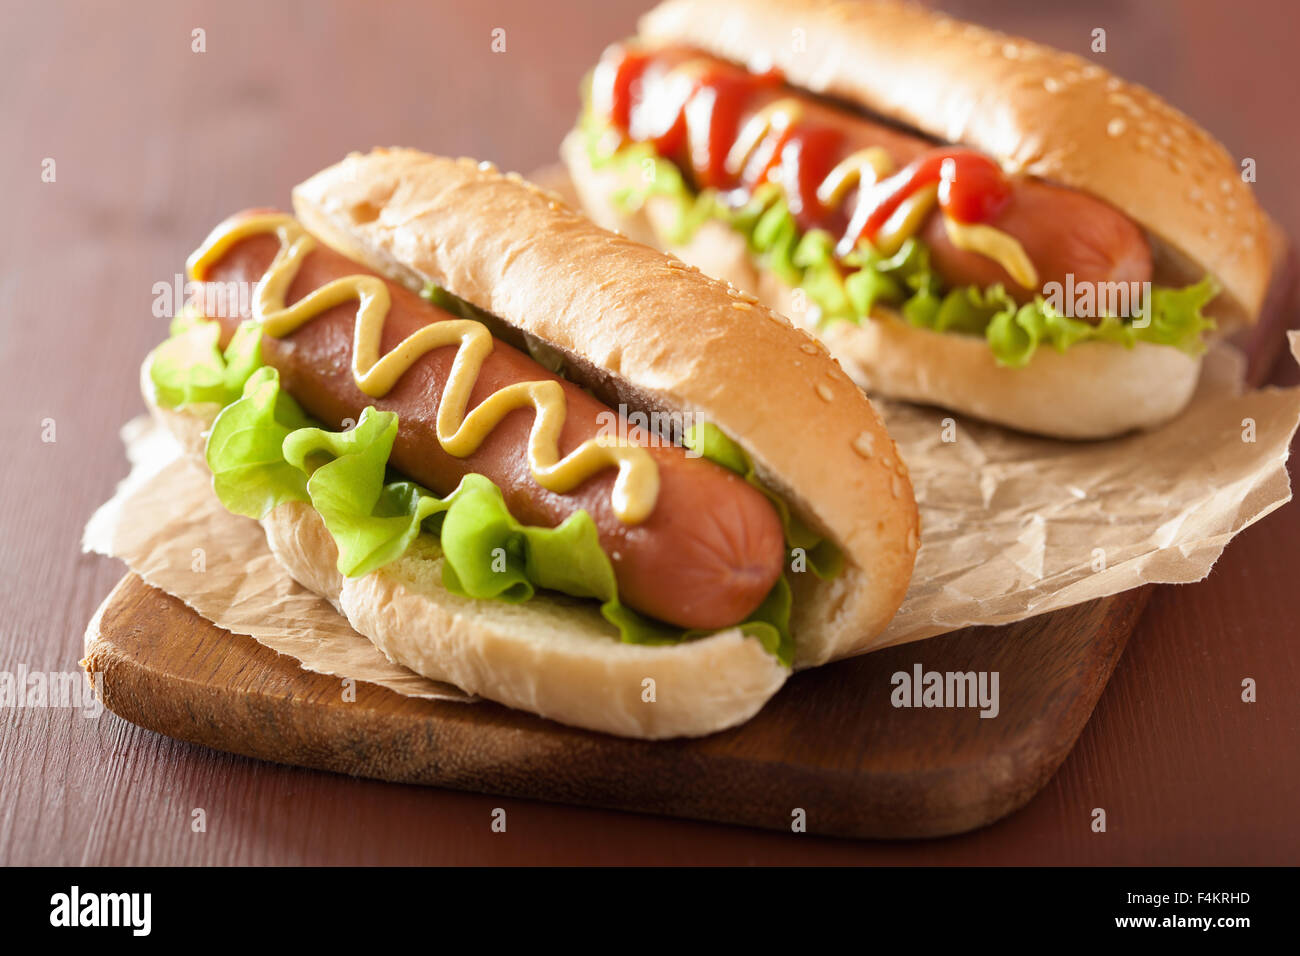 hot dog with ketchup mustard and vegetables Stock Photo